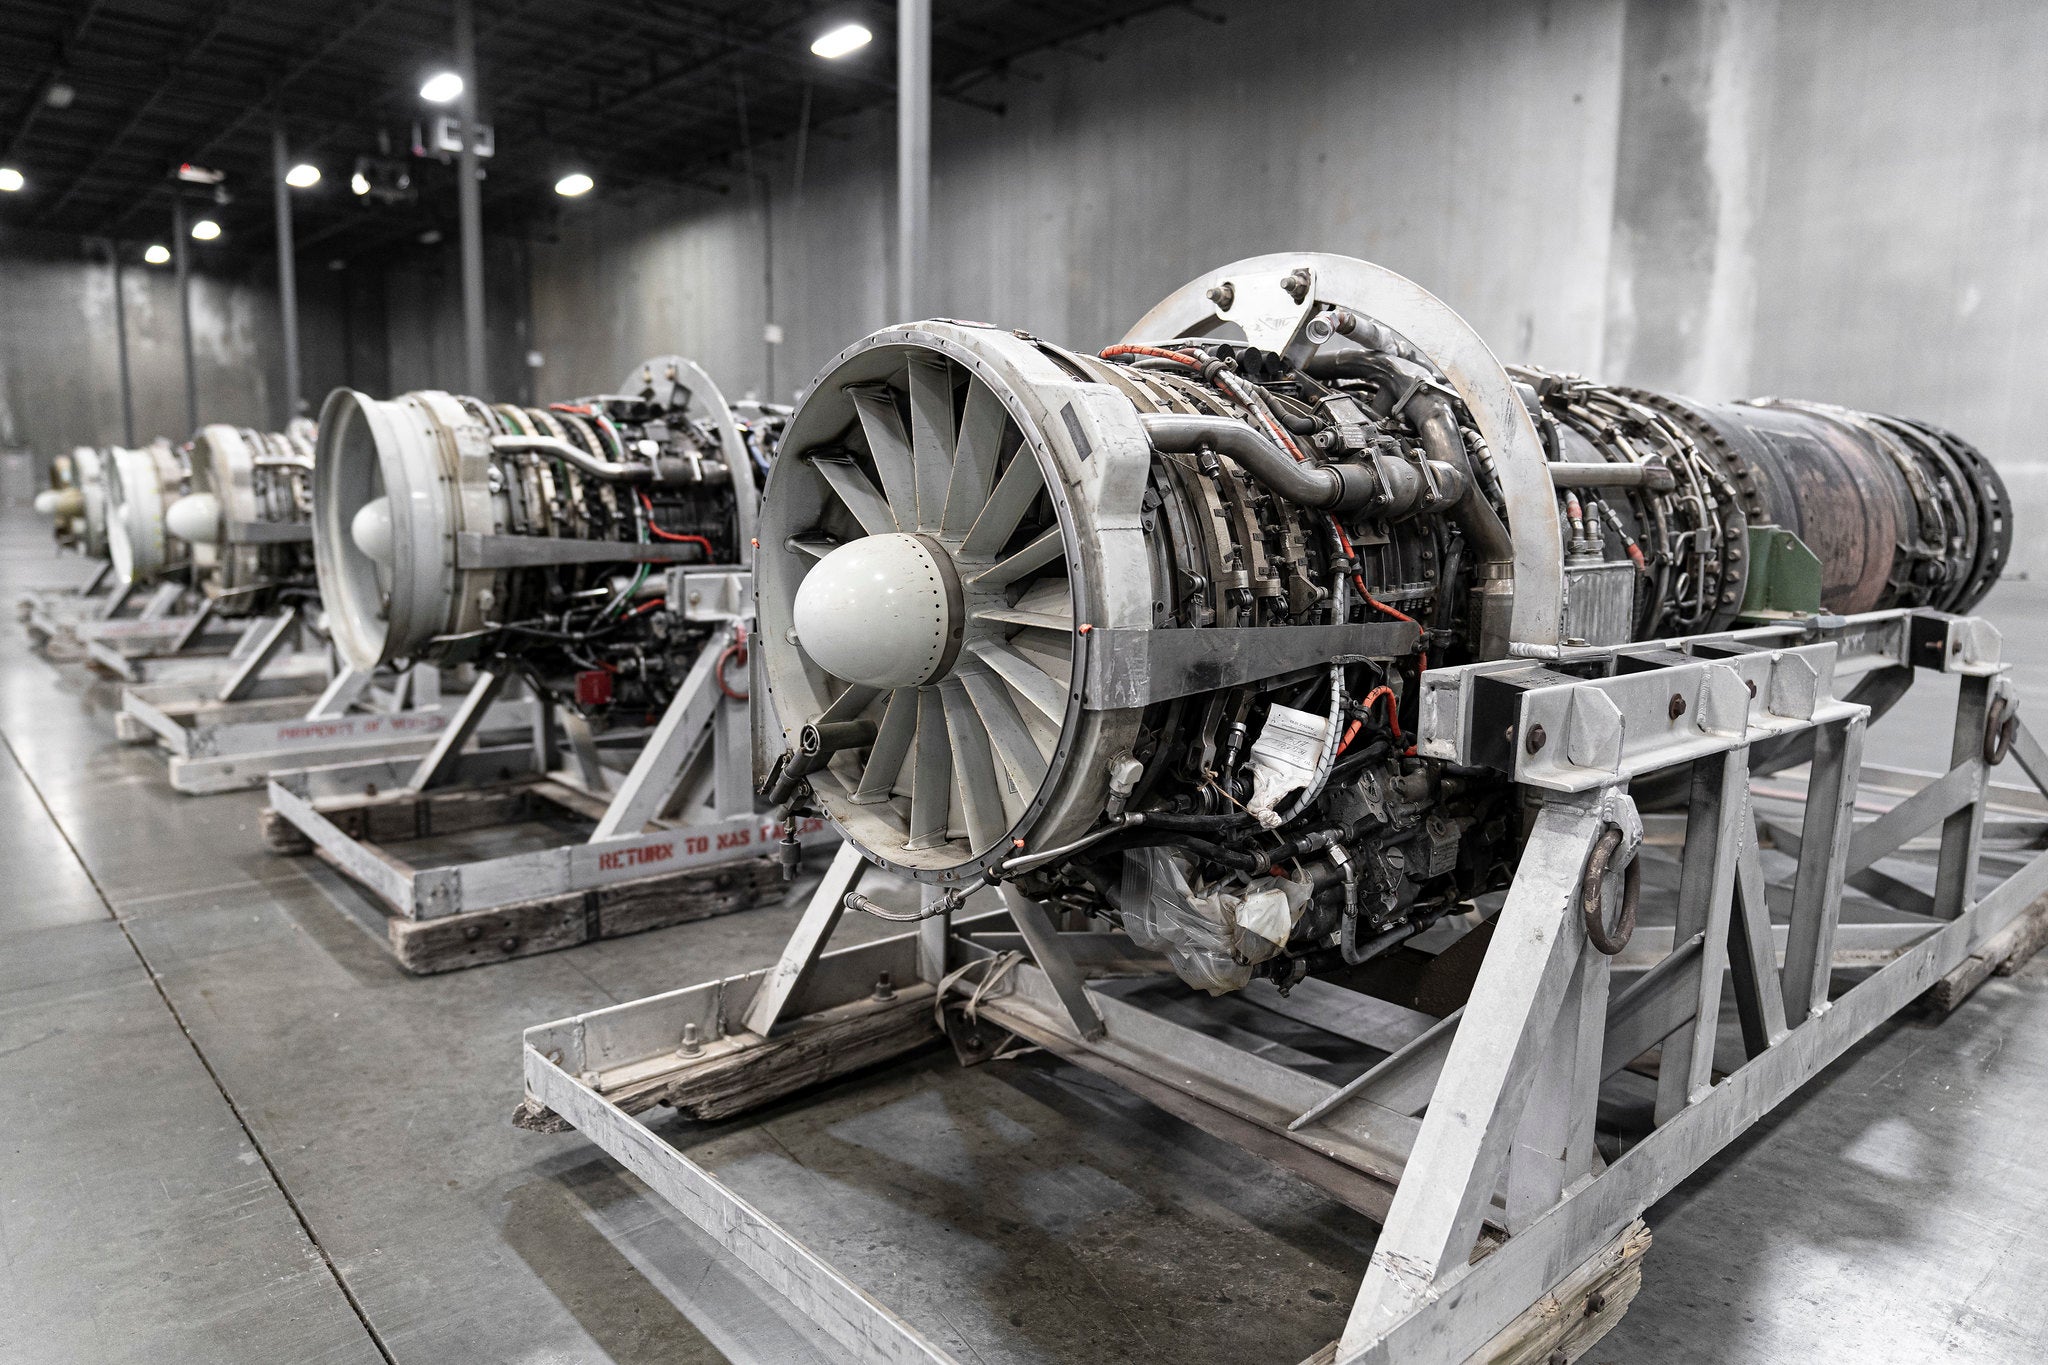 Hermeus has acquired several GE J85 turbojet engines to support the development of Quarterhorse at its facility in Atlanta.